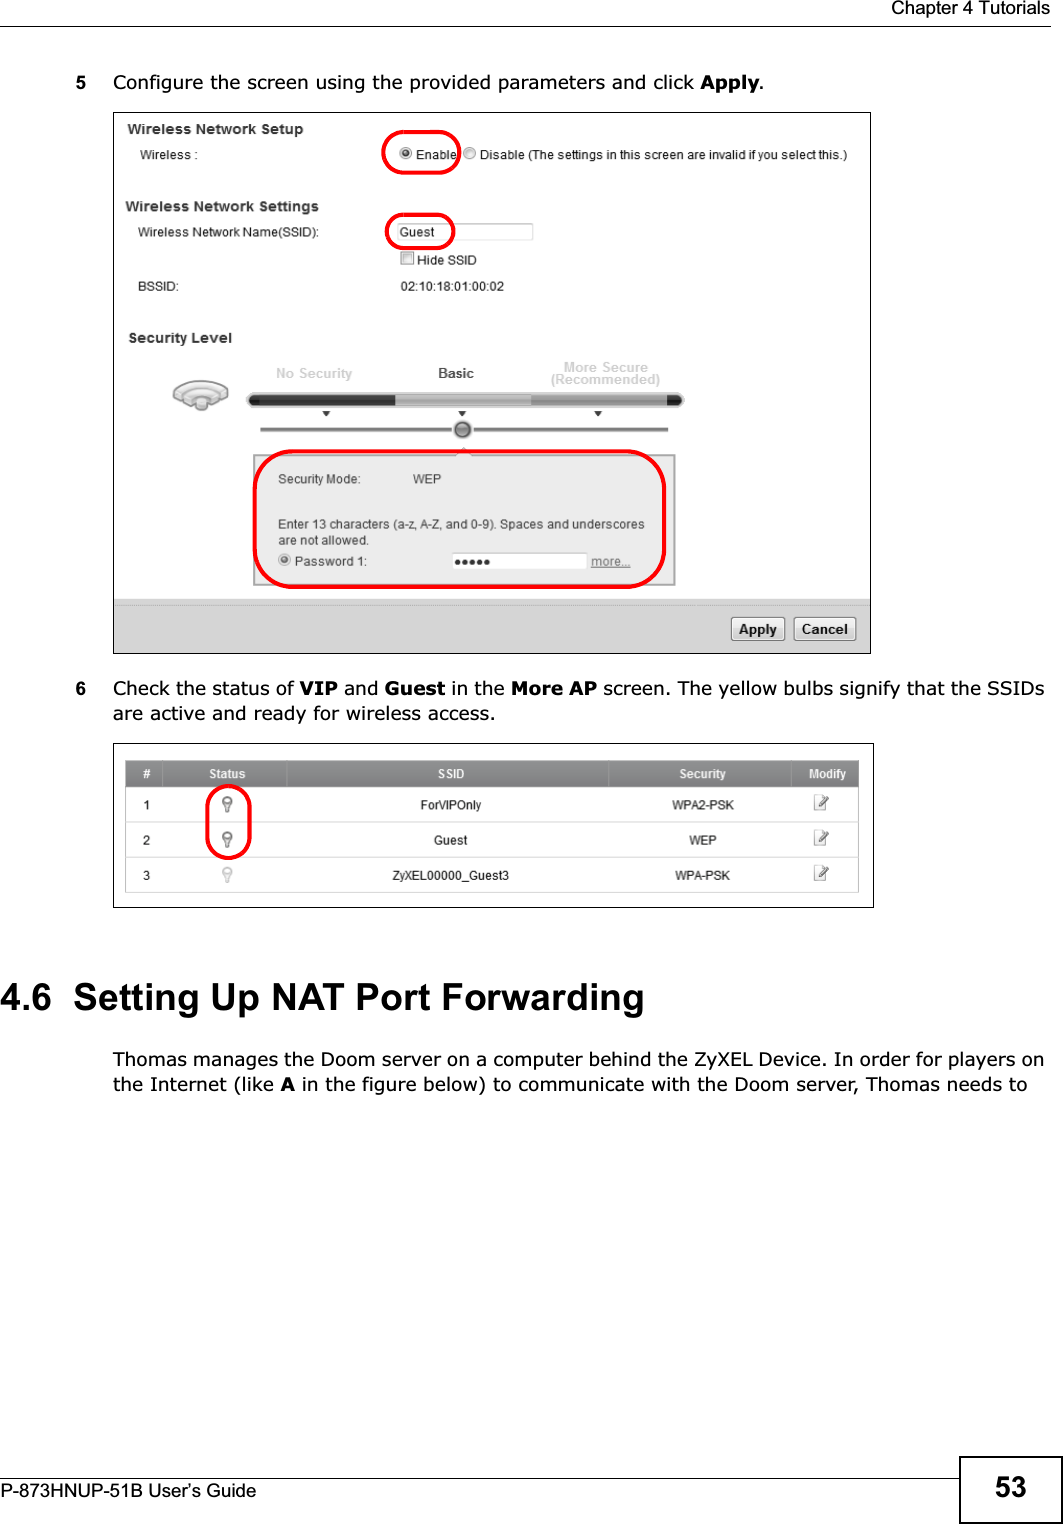  Chapter 4 TutorialsP-873HNUP-51B User’s Guide 535Configure the screen using the provided parameters and click Apply.6Check the status of VIP and Guest in the More AP screen. The yellow bulbs signify that the SSIDs are active and ready for wireless access. 4.6  Setting Up NAT Port ForwardingThomas manages the Doom server on a computer behind the ZyXEL Device. In order for players on the Internet (like A in the figure below) to communicate with the Doom server, Thomas needs to 